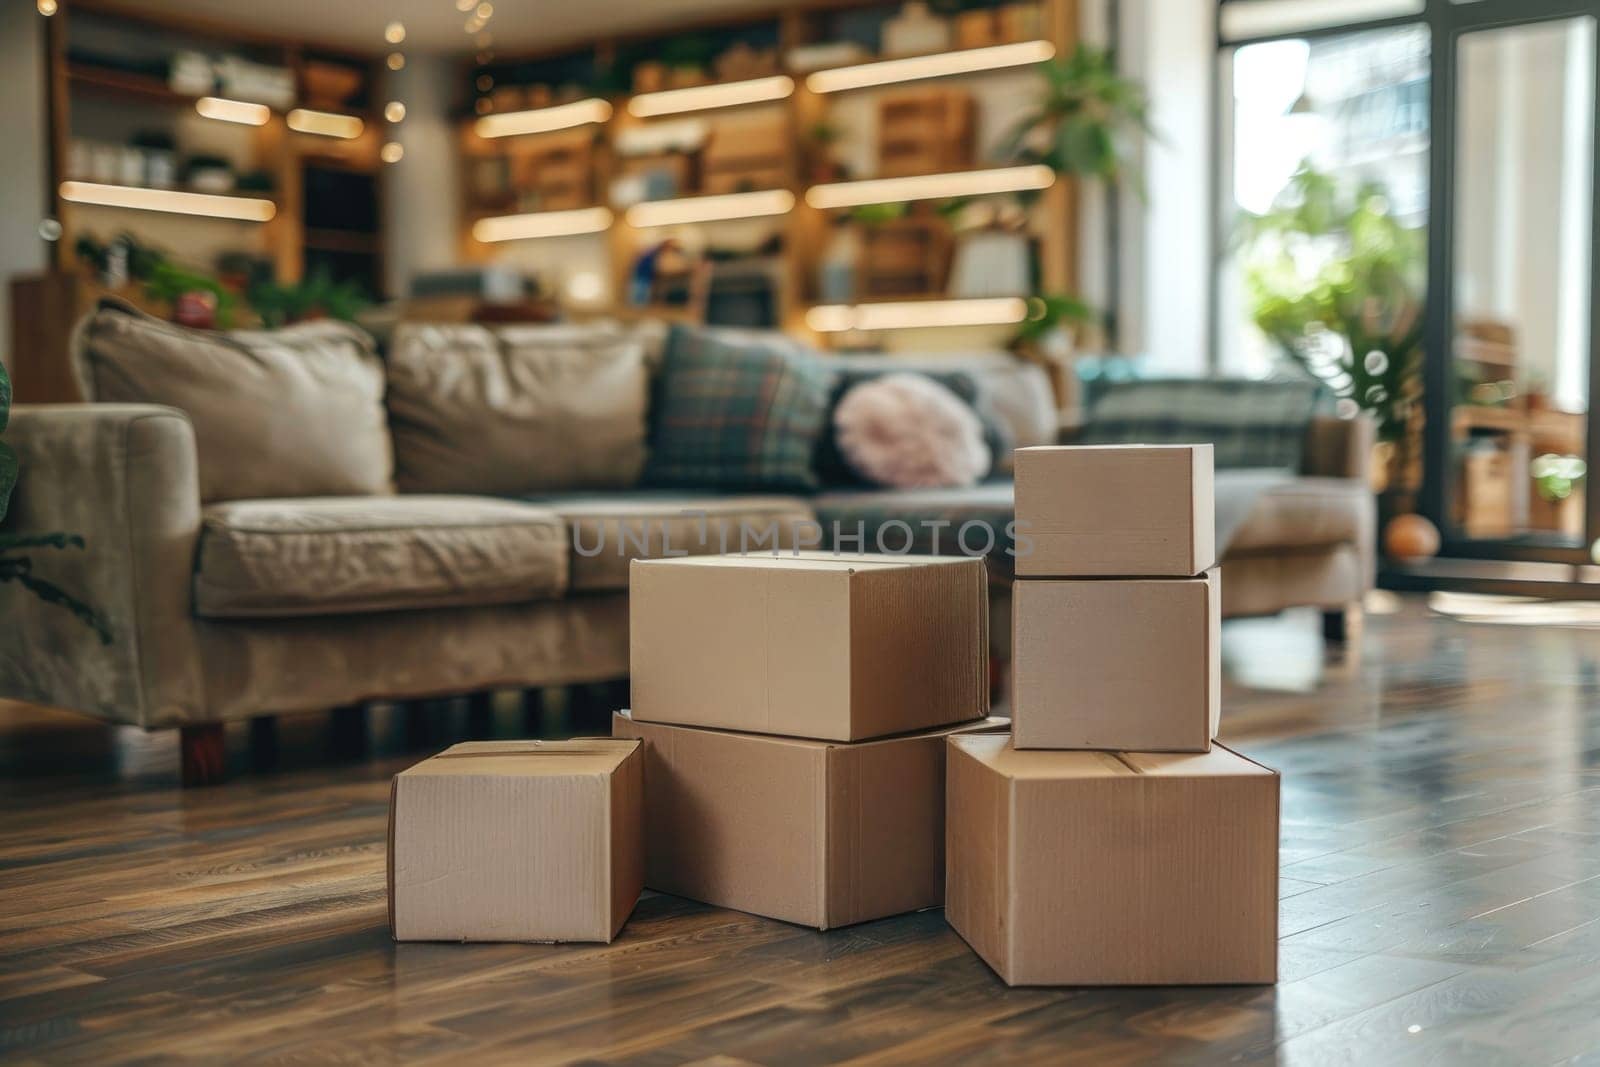 A stack of cardboard boxes is sitting on a wooden floor in a living room. The boxes are of different sizes and are arranged in a neat pile. The room has a cozy and welcoming atmosphere, with a couch